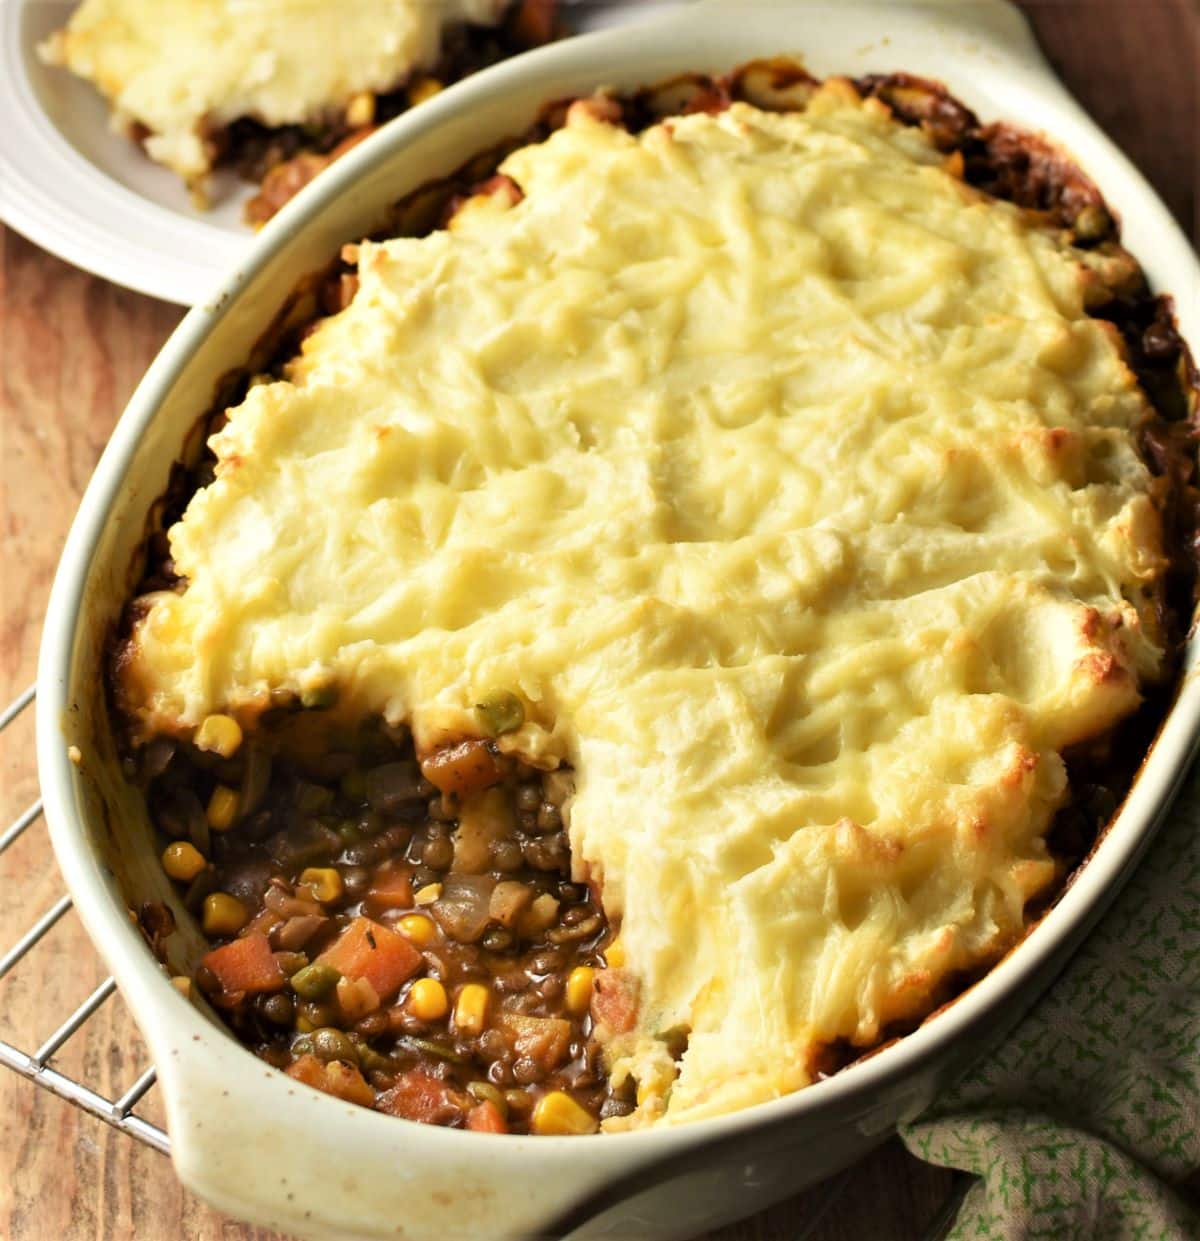 Lentil and vegetable shepherd's pie in oval dish.